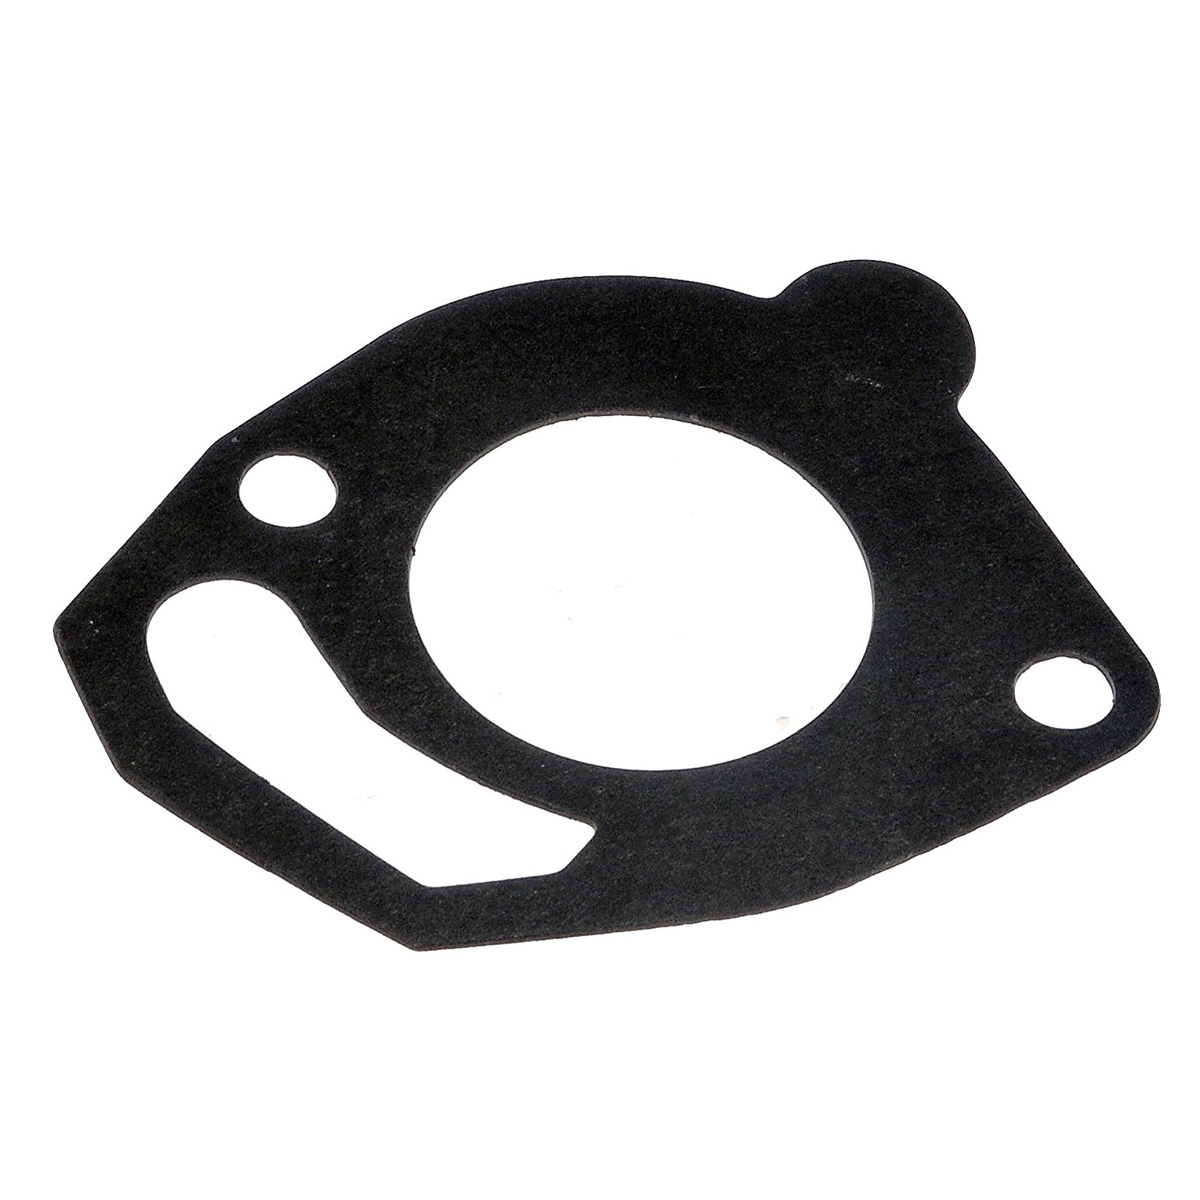 VAUXHALL AND OPEL TIGRA Thermostat Gasket